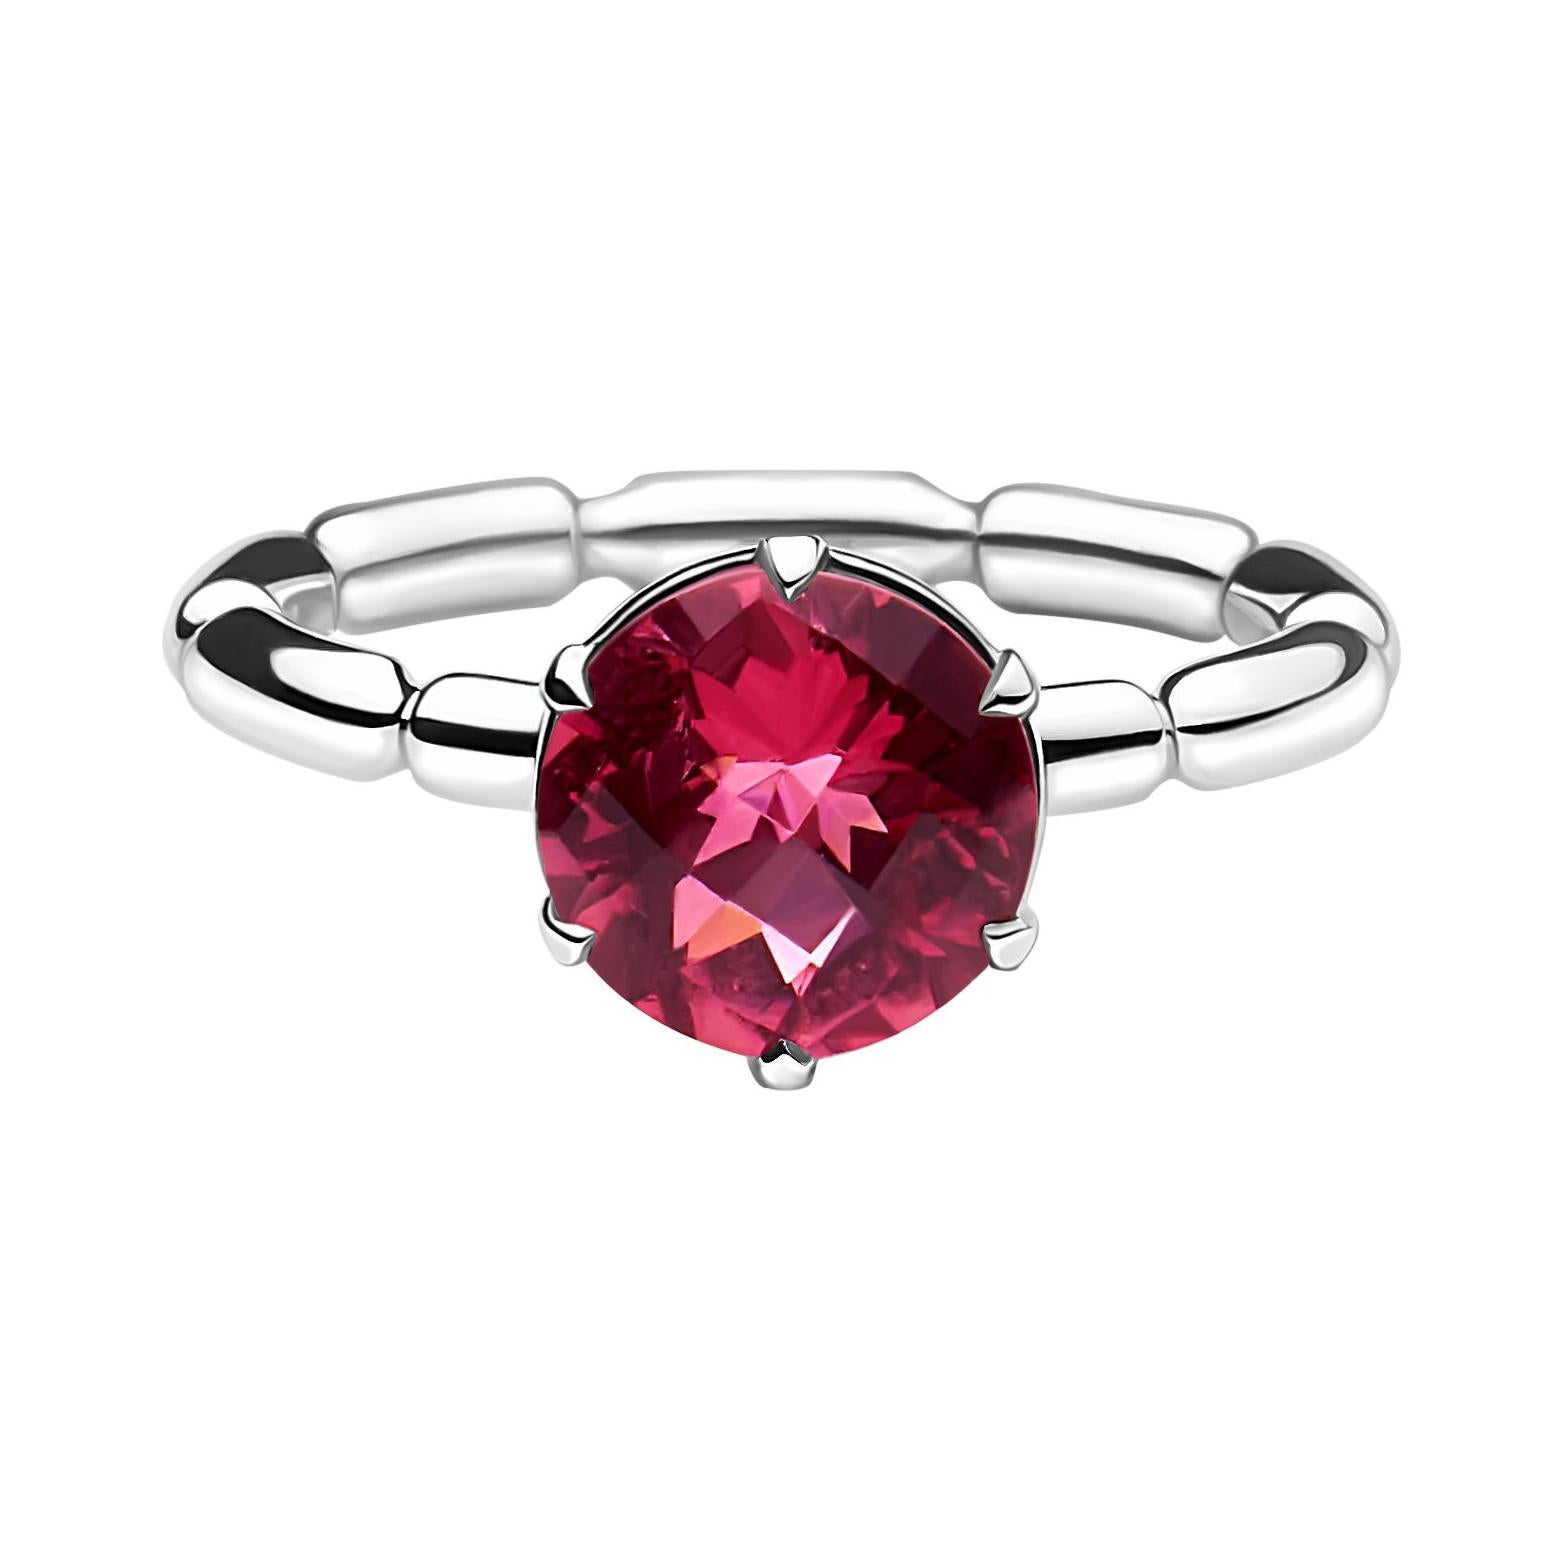 For Sale:  14k White Gold Solitaire Engagement Ring with 1.80 Carat Round Pink Tourmaline